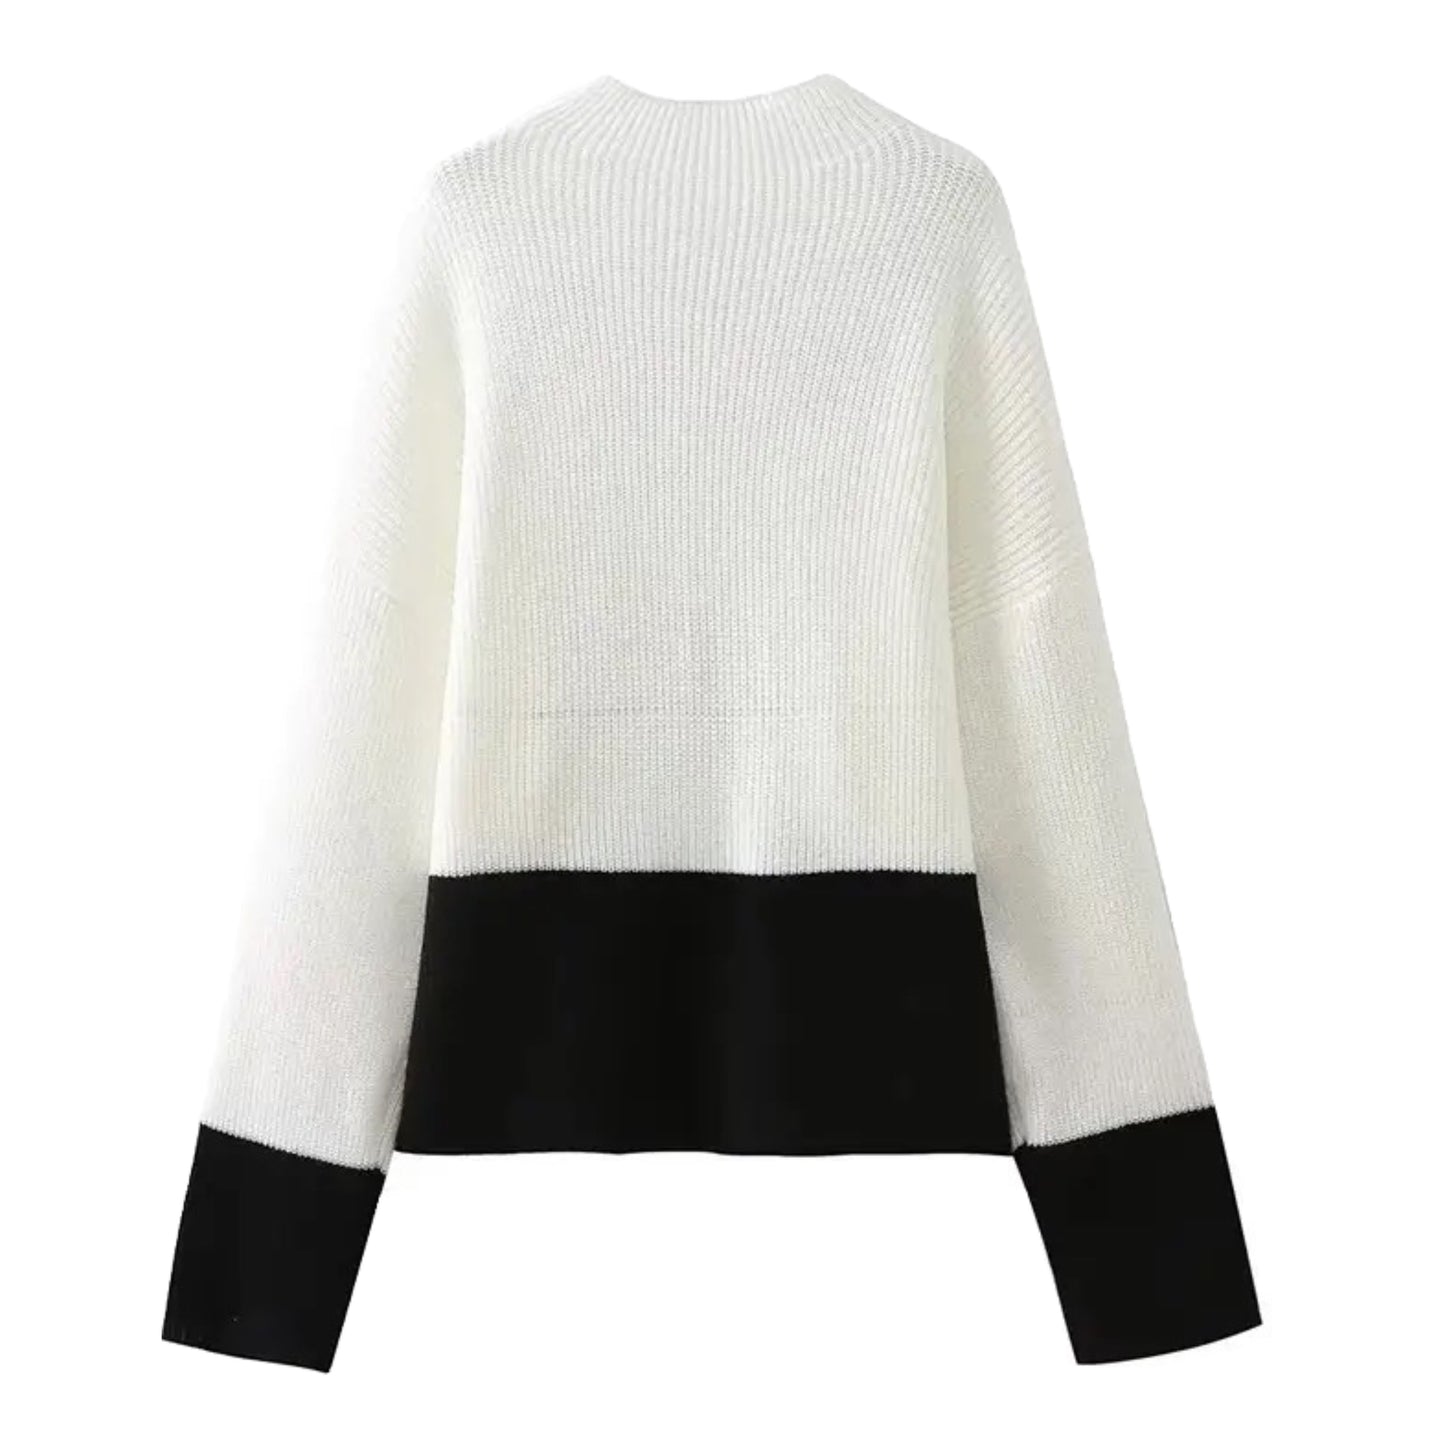 White & Black Contrast Knit Turtleneck Pull Over Sweater